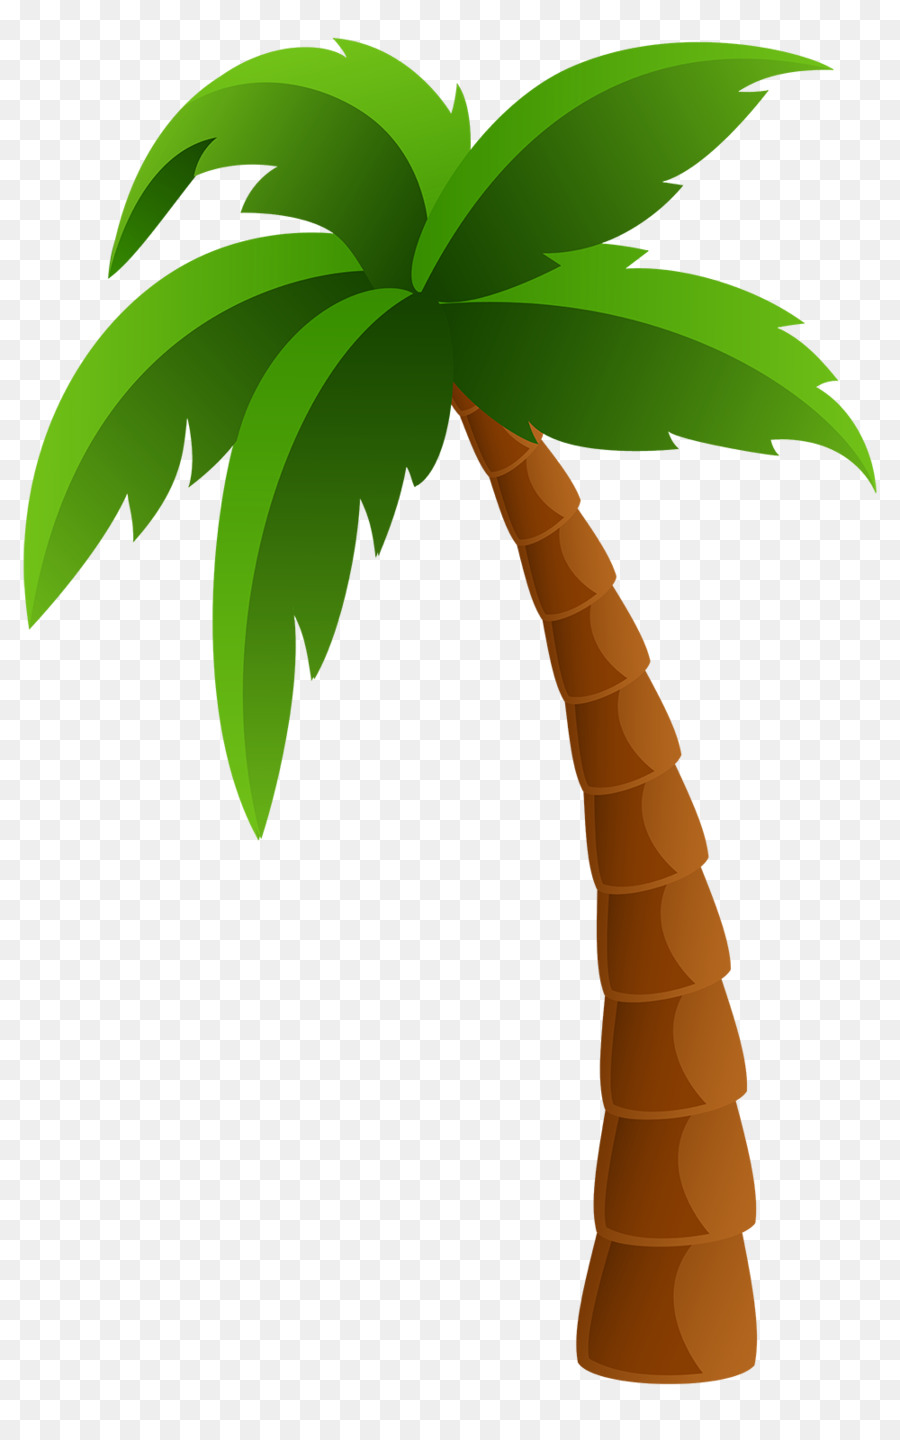 Coconut Clipart Palm Tree and other clipart images on Cliparts pub™